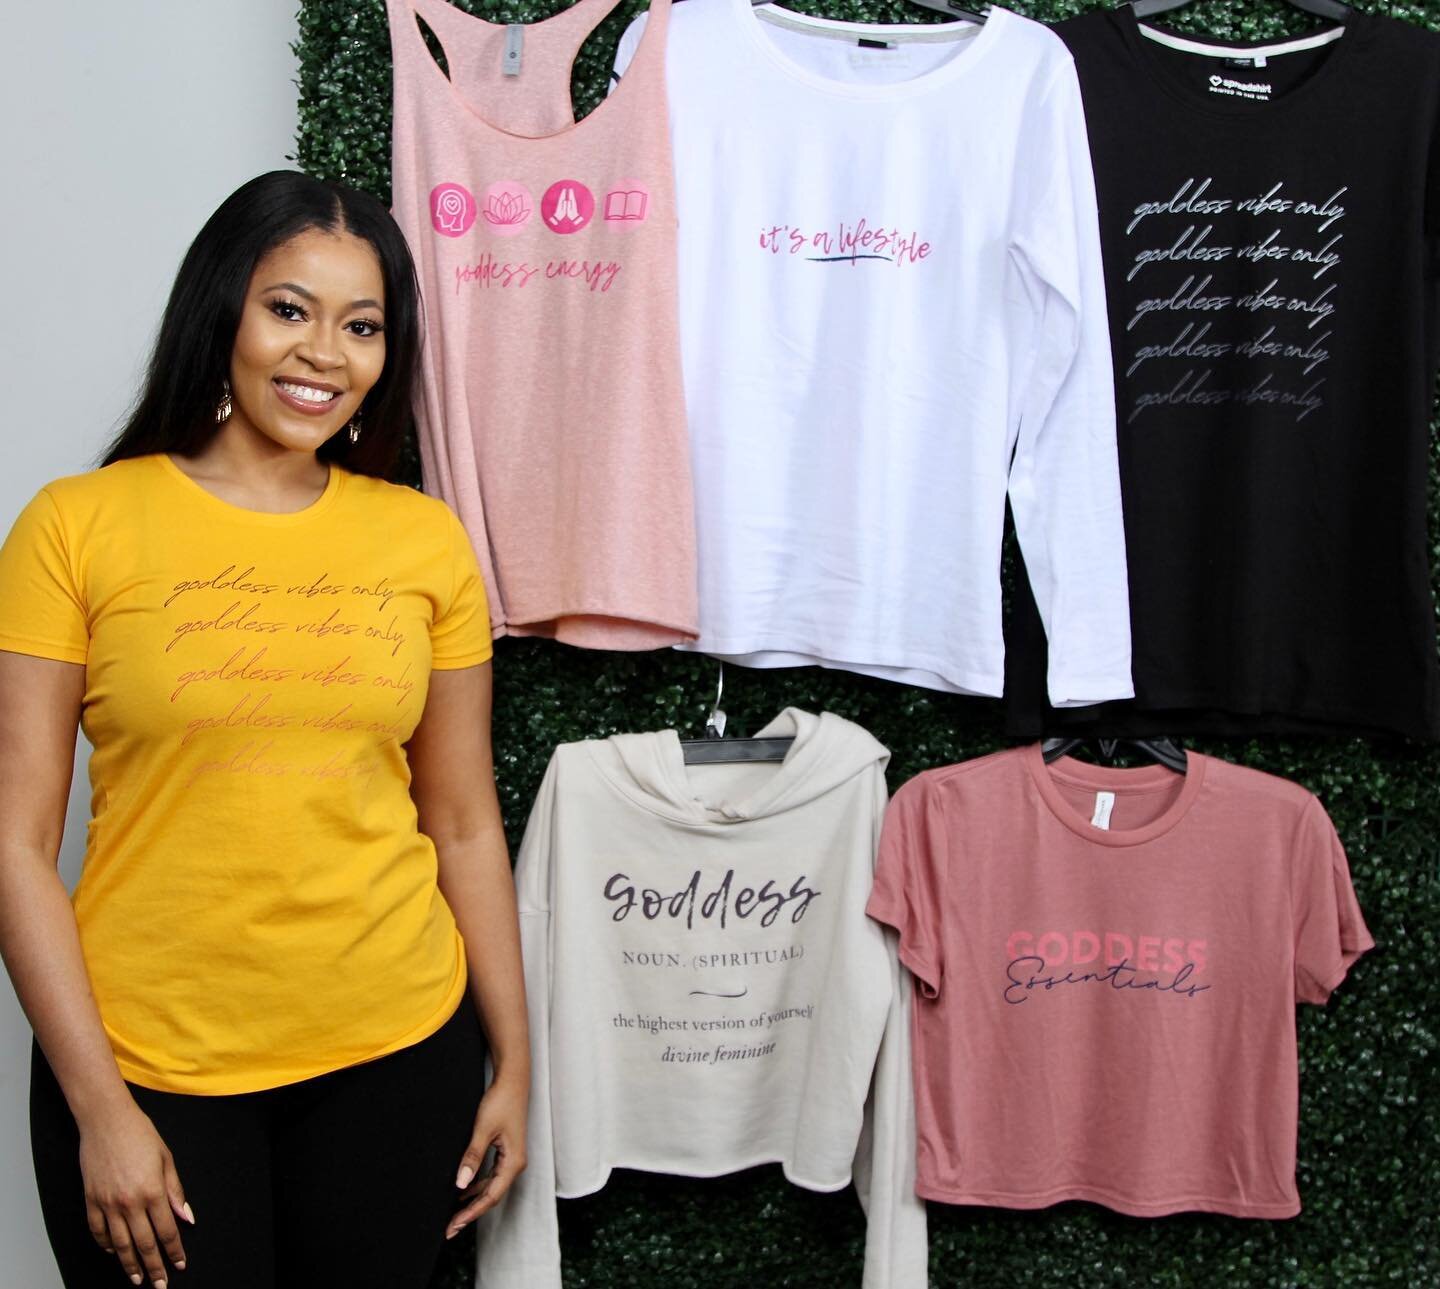 MERCH MADNESS IS FINALLY HERE. Hit the link in my bio to shop @goddessessentials.love new merchandise apparel and self-care kits! I created this collection to help every Goddess feel beautiful, confident and comfortable in the skin she&rsquo;s in.🥰❤